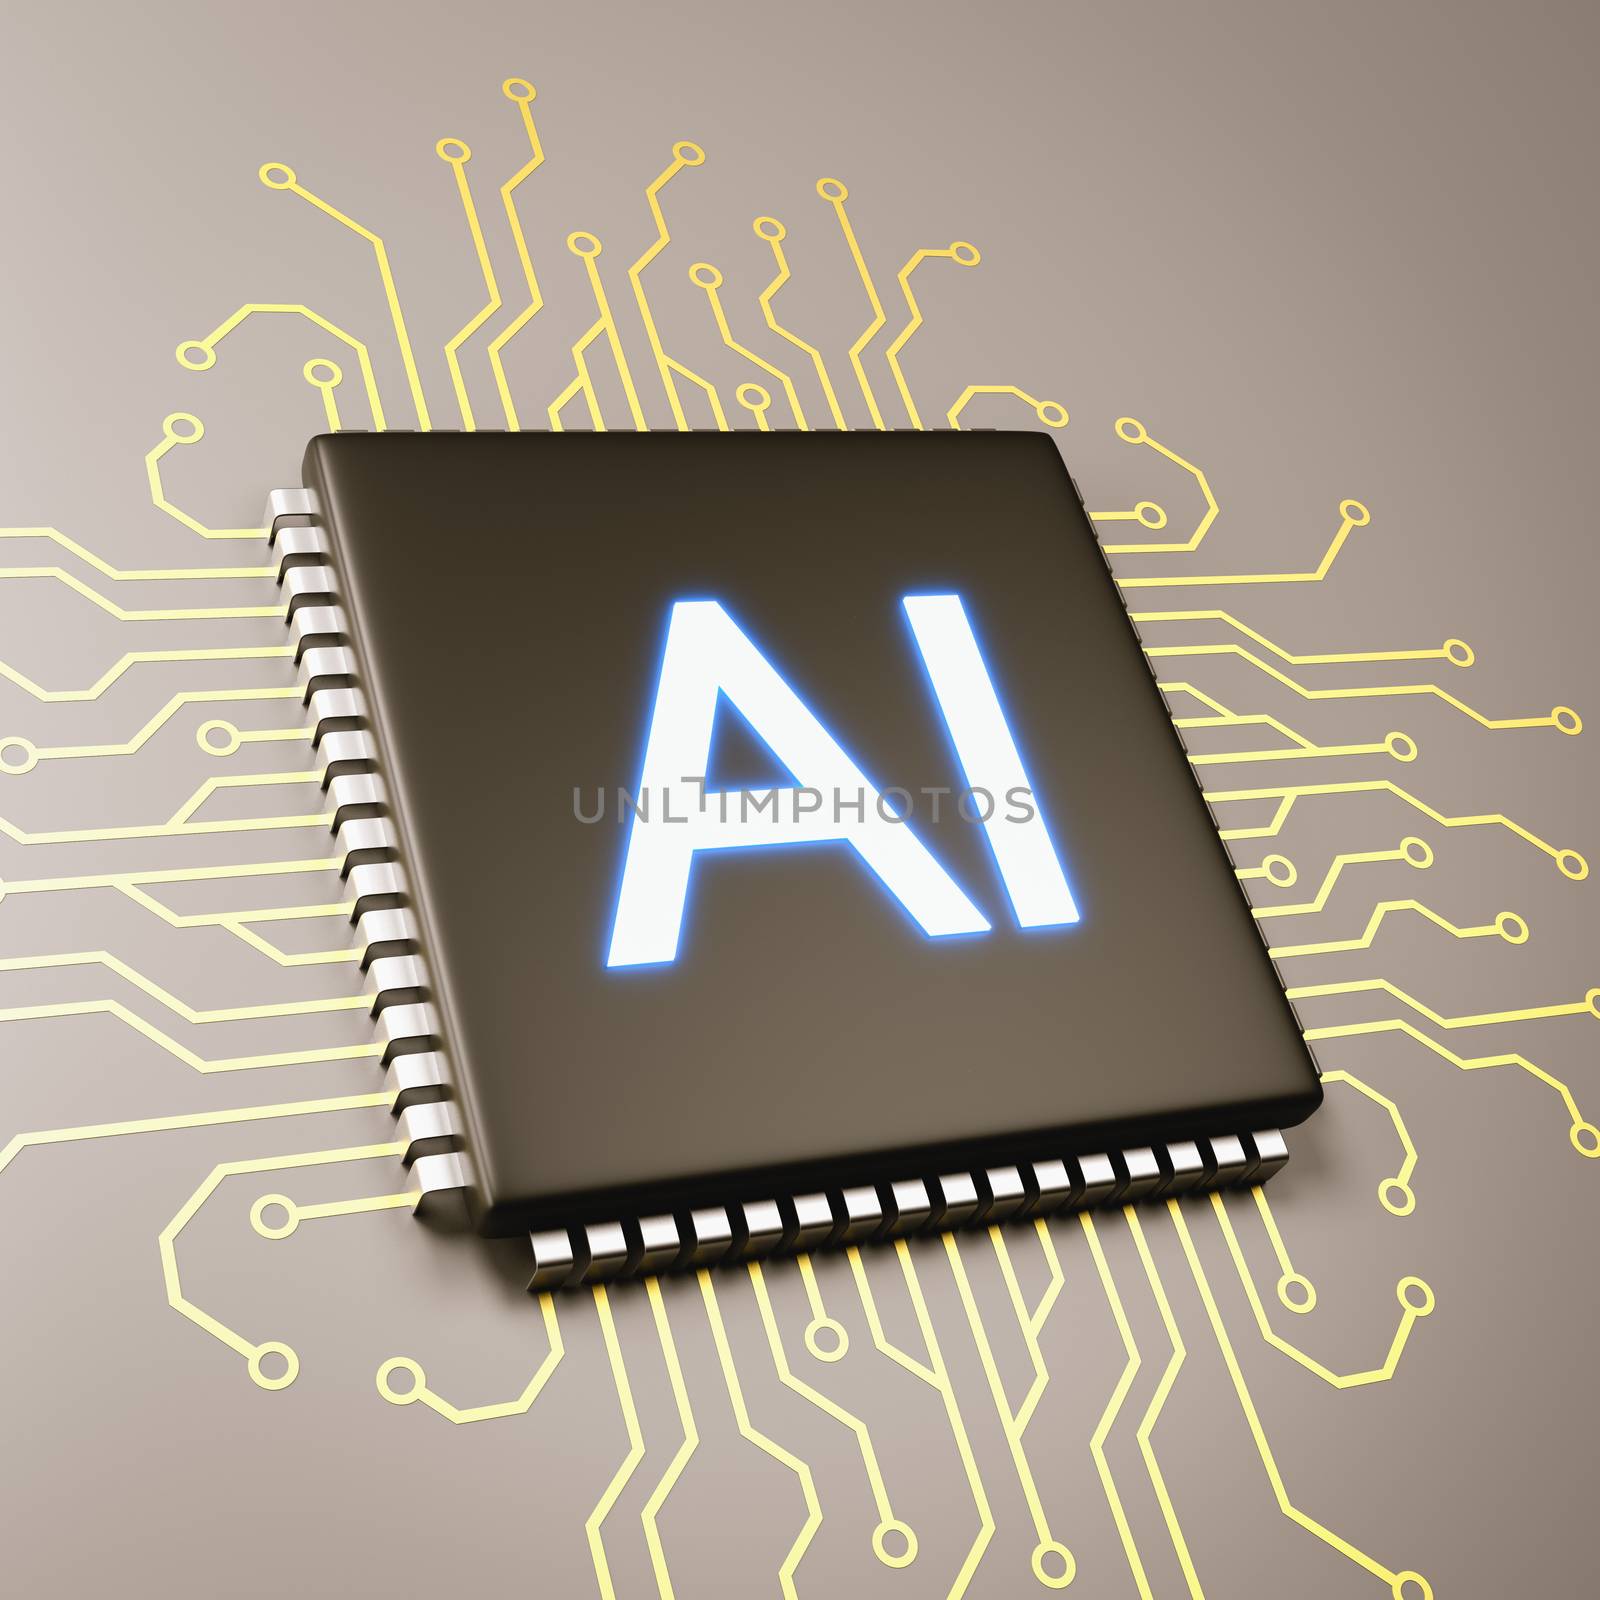 Computer Processor with AI Text 3D Illustration, Artificial Intelligence Concept